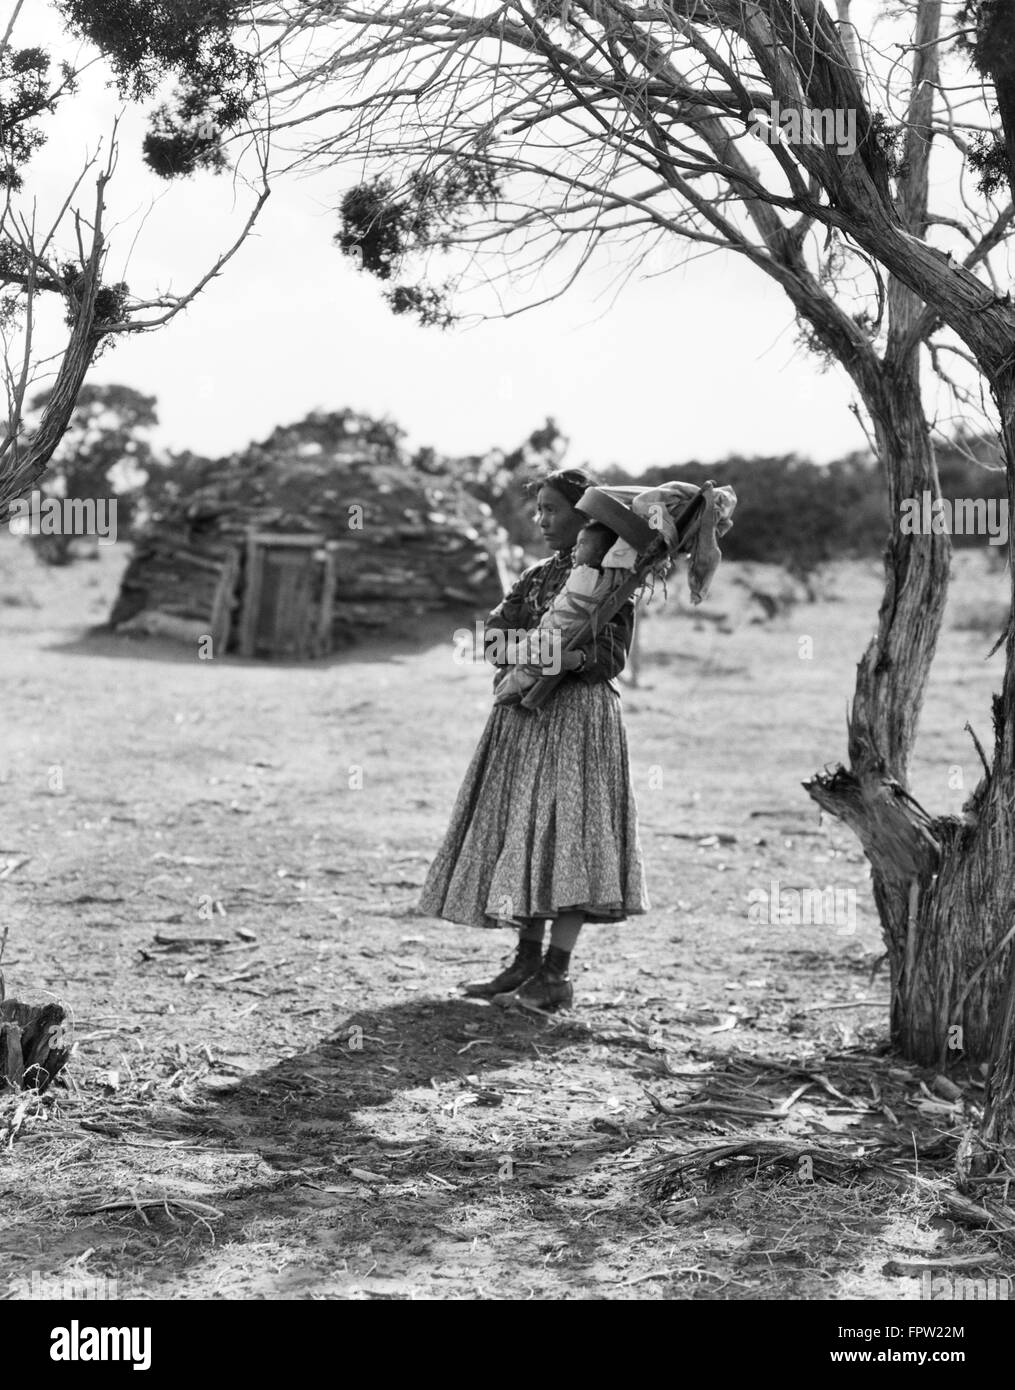 1930s NATIVE AMERICAN NAVAJO WOMAN HOLDING BABY PAPOOSE UNDER TREES WITH HOGAN IN BACKGROUND Stock Photo